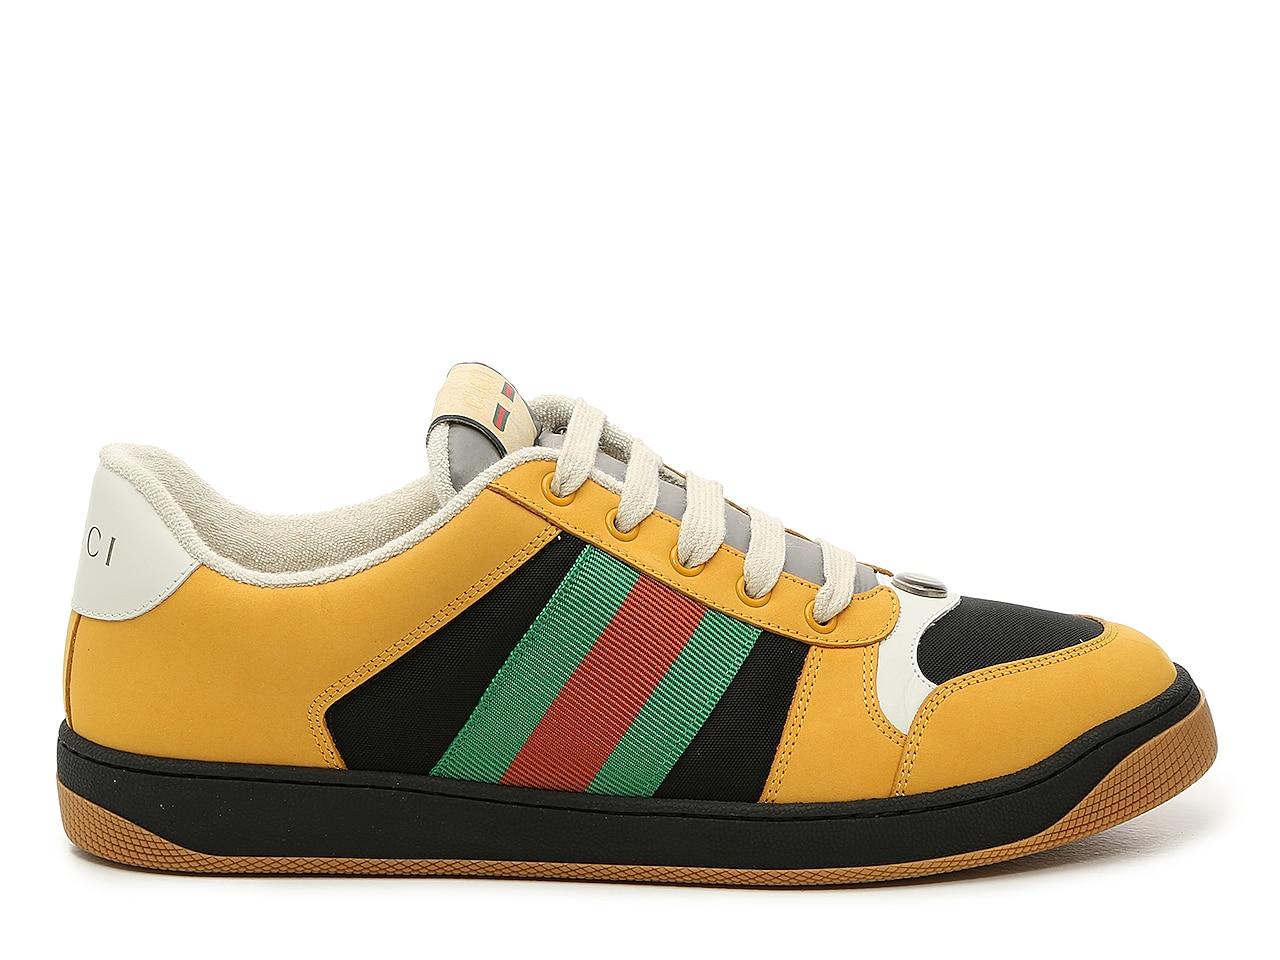 Gucci Ultrapace Sneaker Black, Yellow Snake & Red | END.